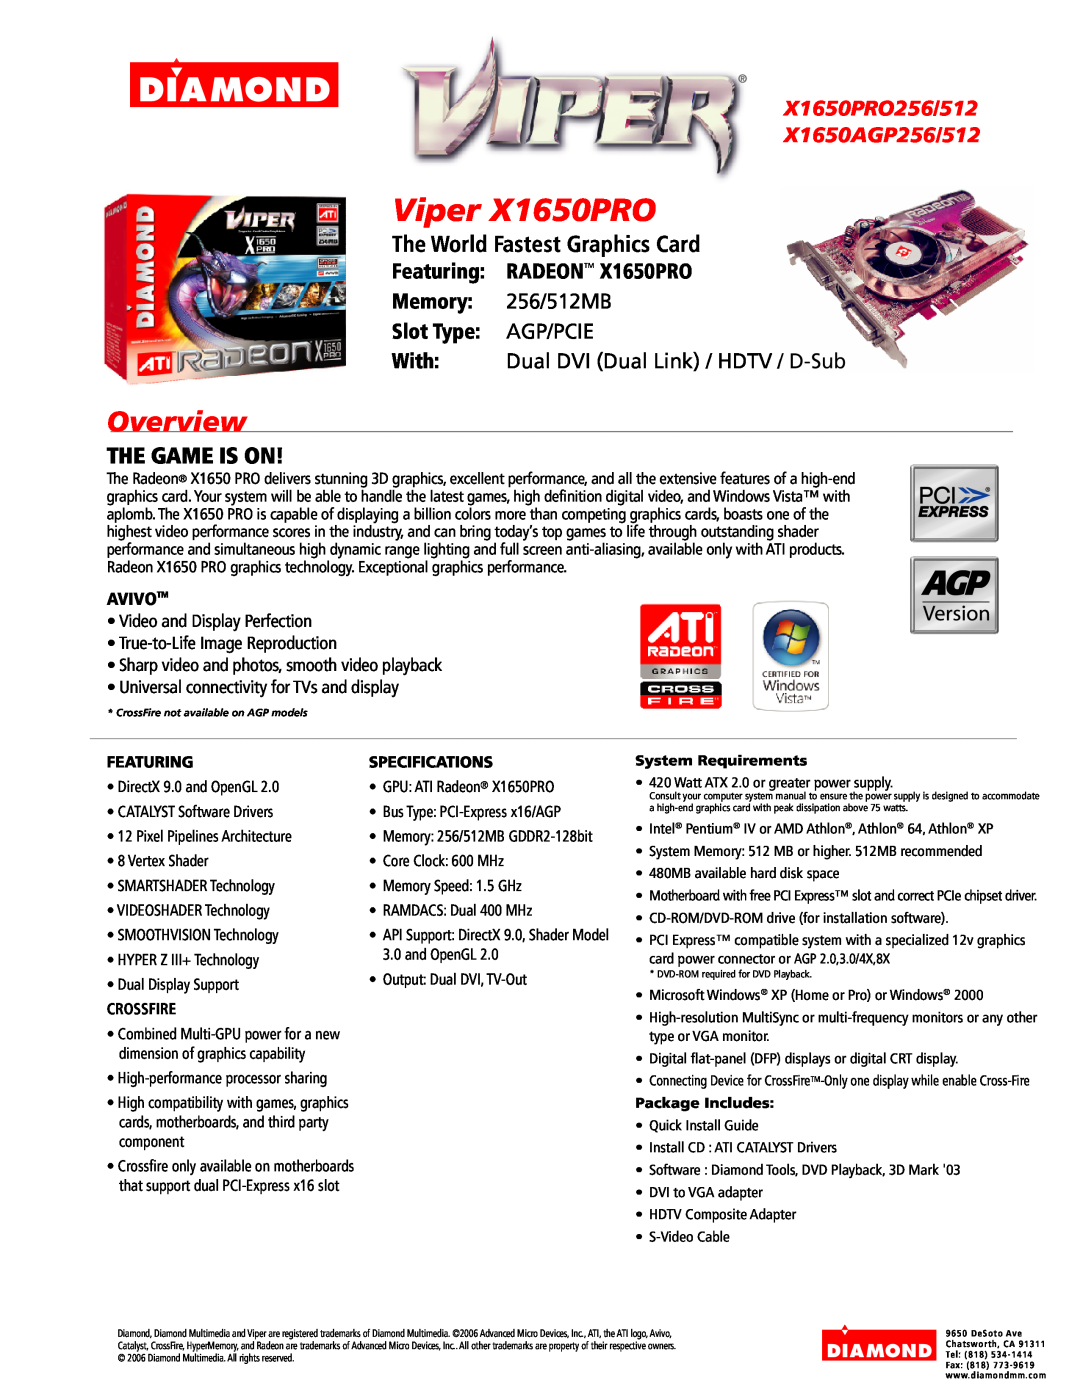 Diamond Multimedia X1650PRO512 system manual Viper X1650PRO, Overview, The World Fastest Graphics Card, The Game Is On 